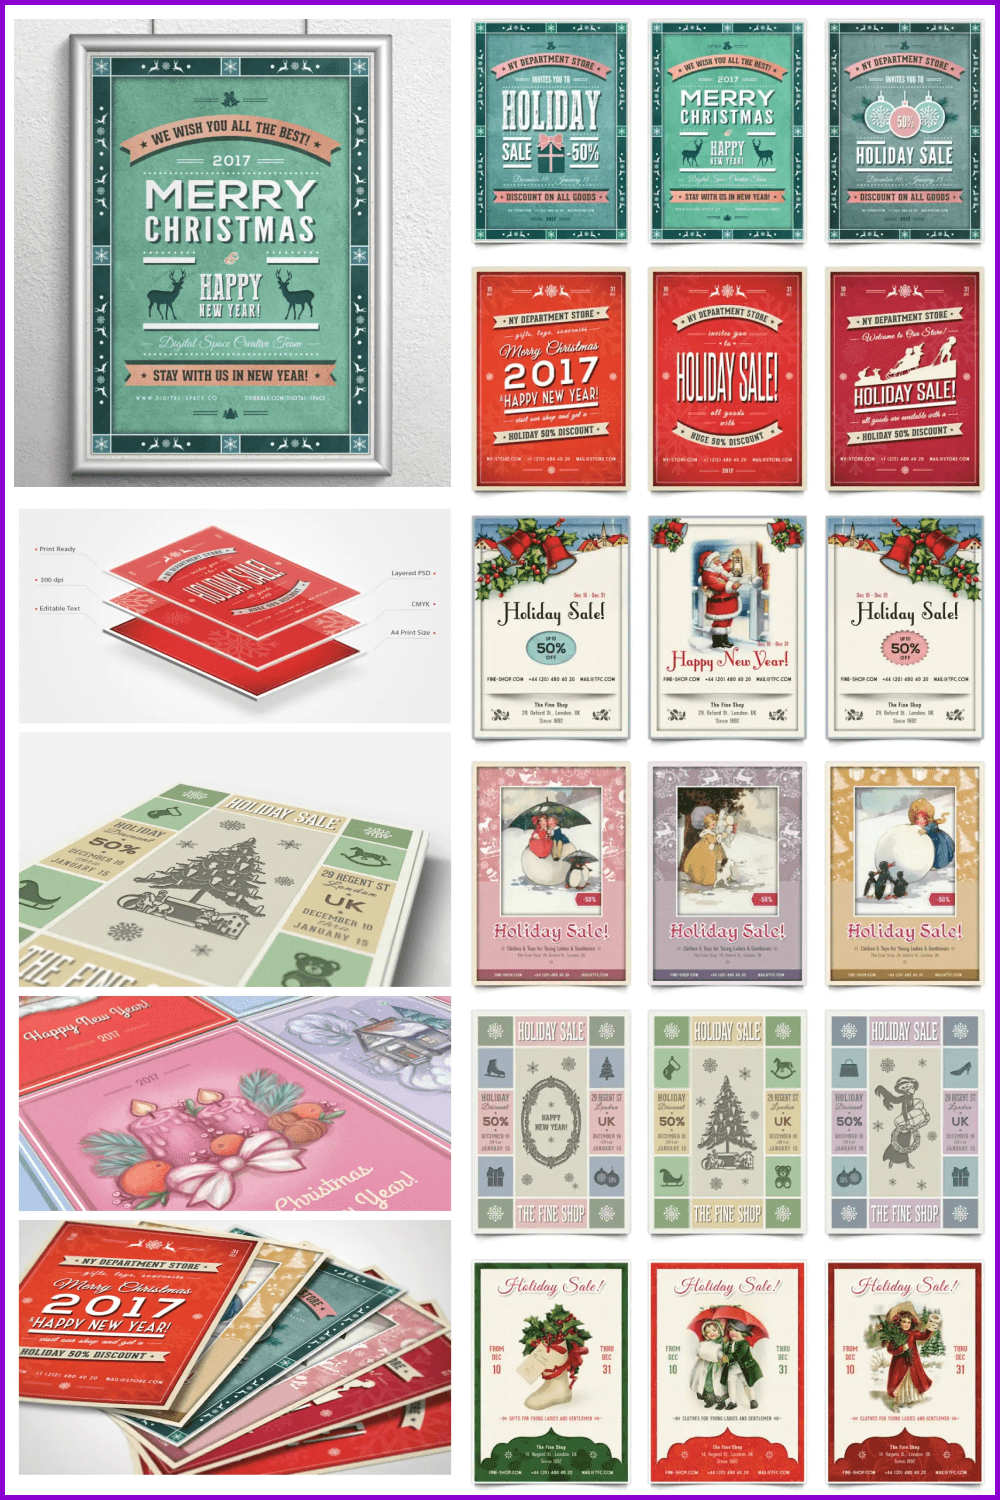 Collage with vintage Christmas greeting cards.